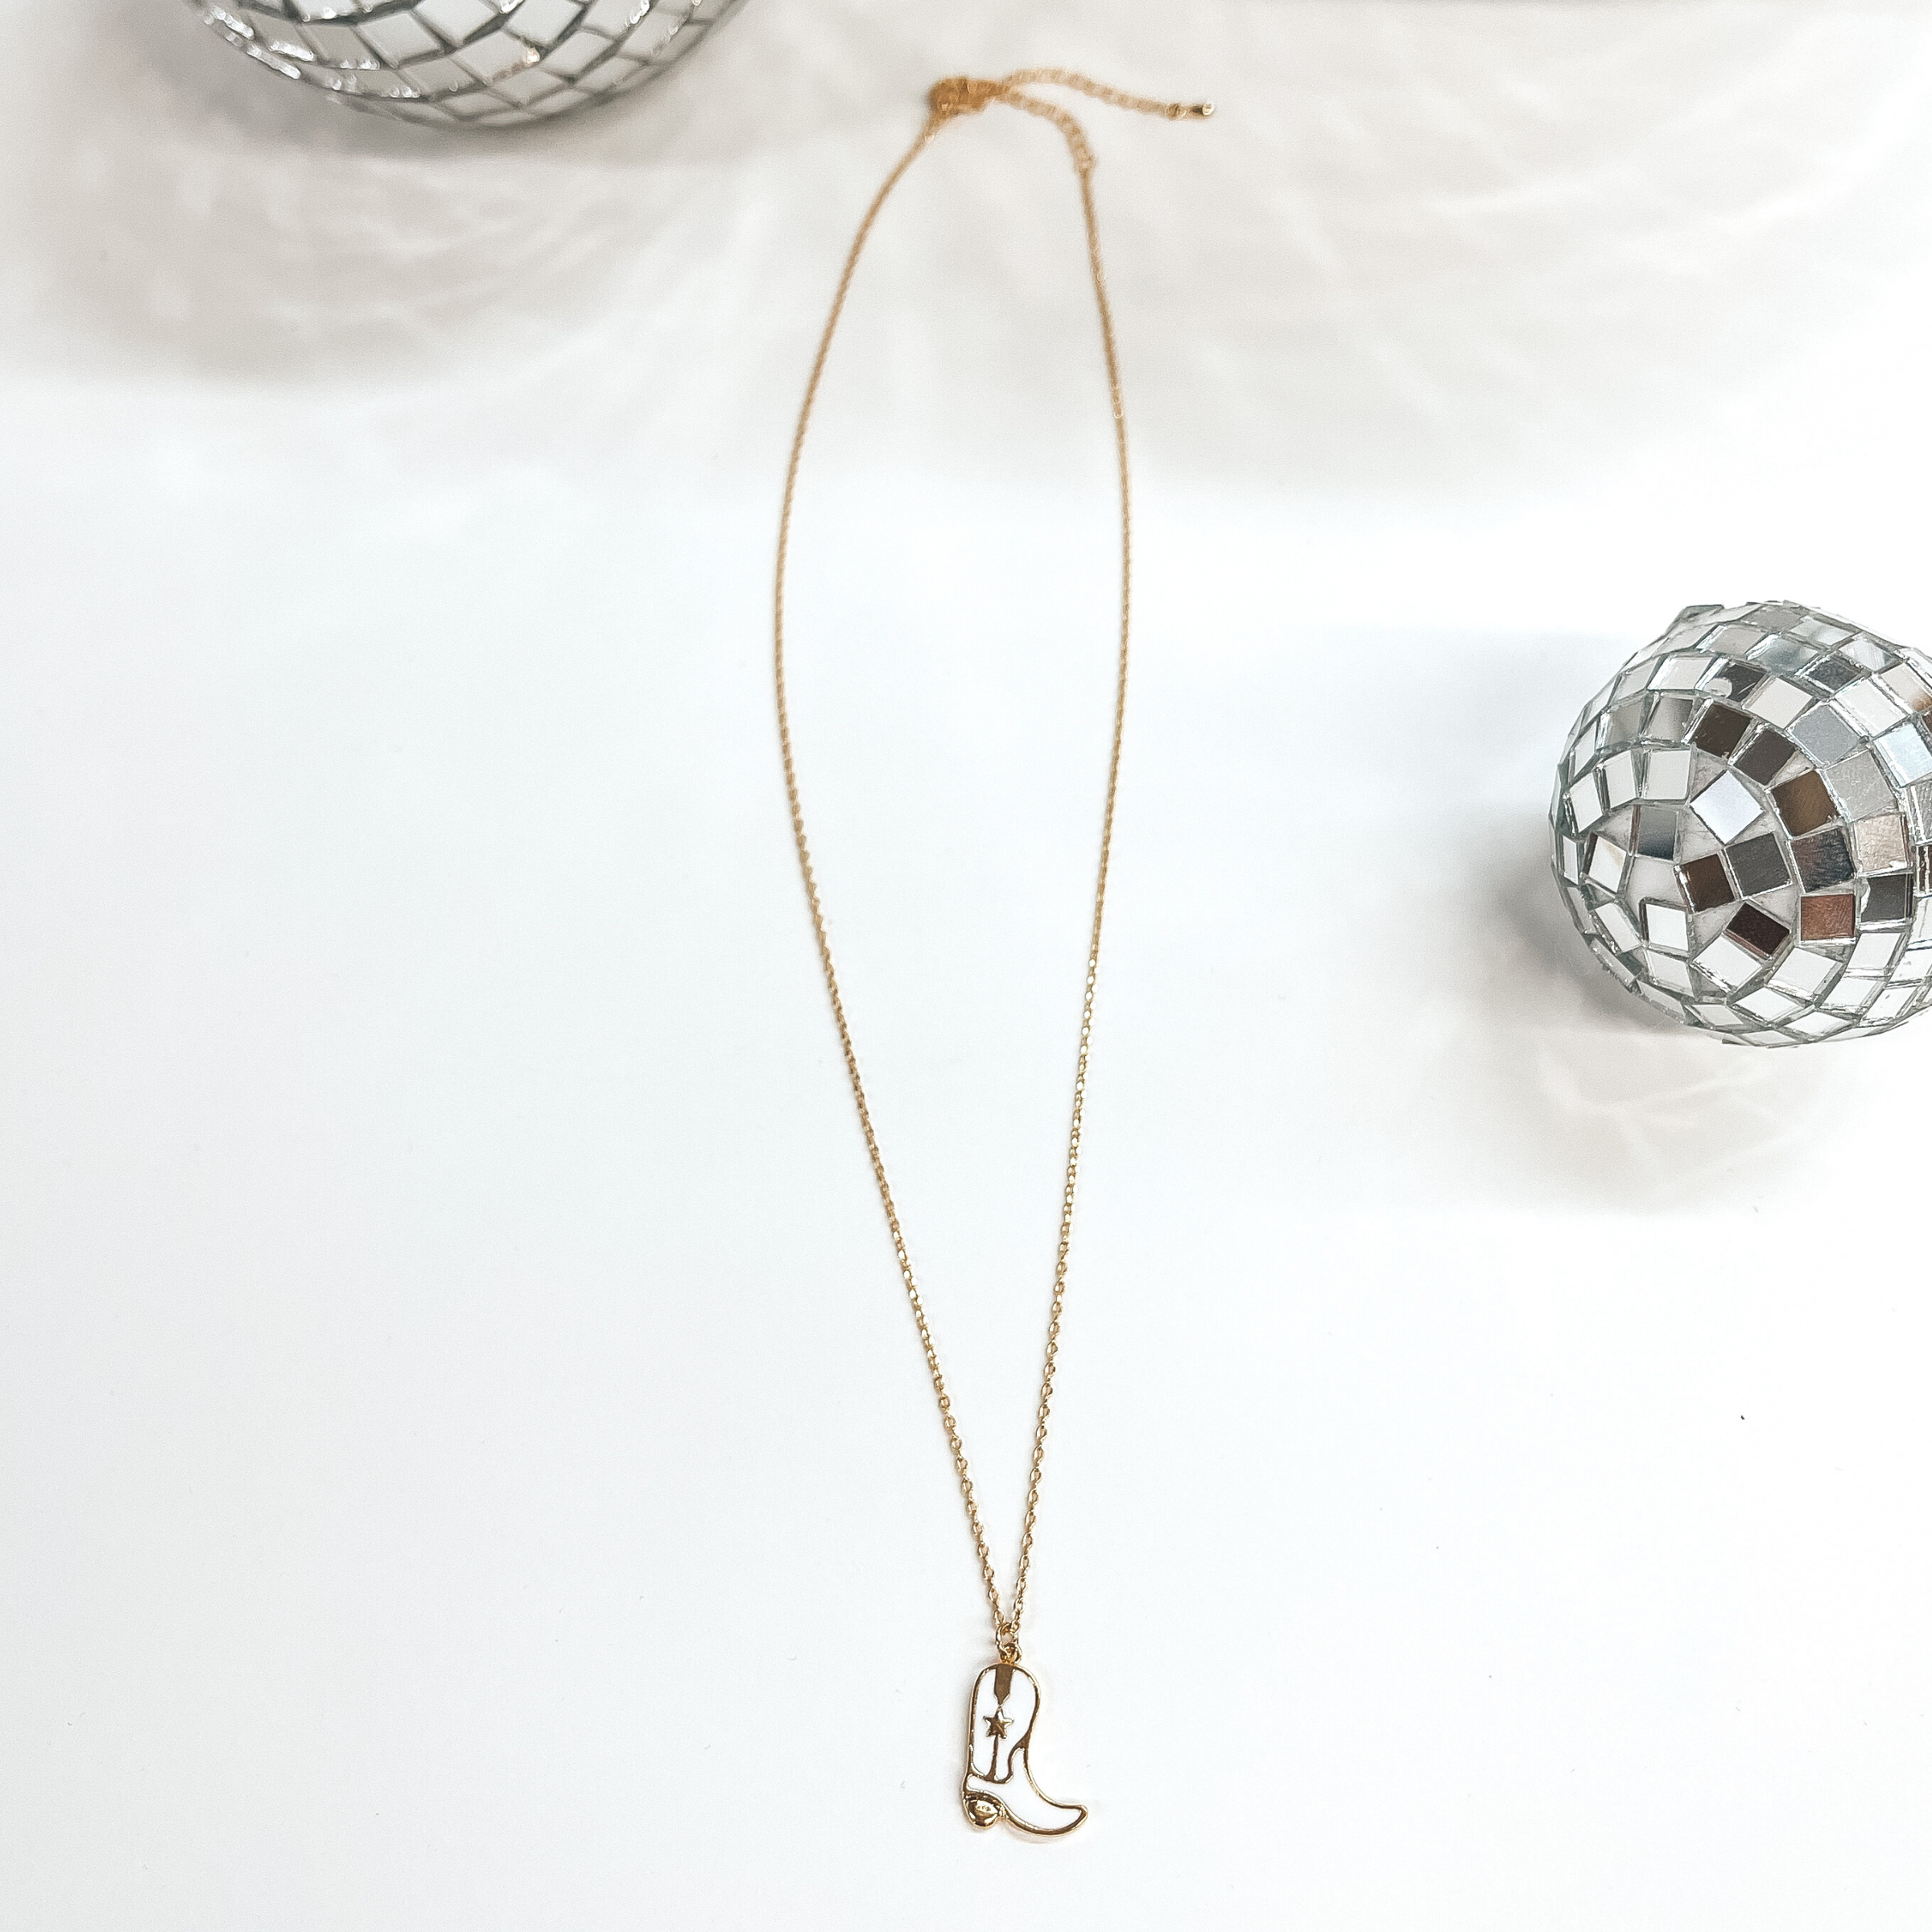 Small gold chain necklace with a white boot pendant,  the boot pendant has a gold star in the center.  Taken on a white background with disco balls as decor.